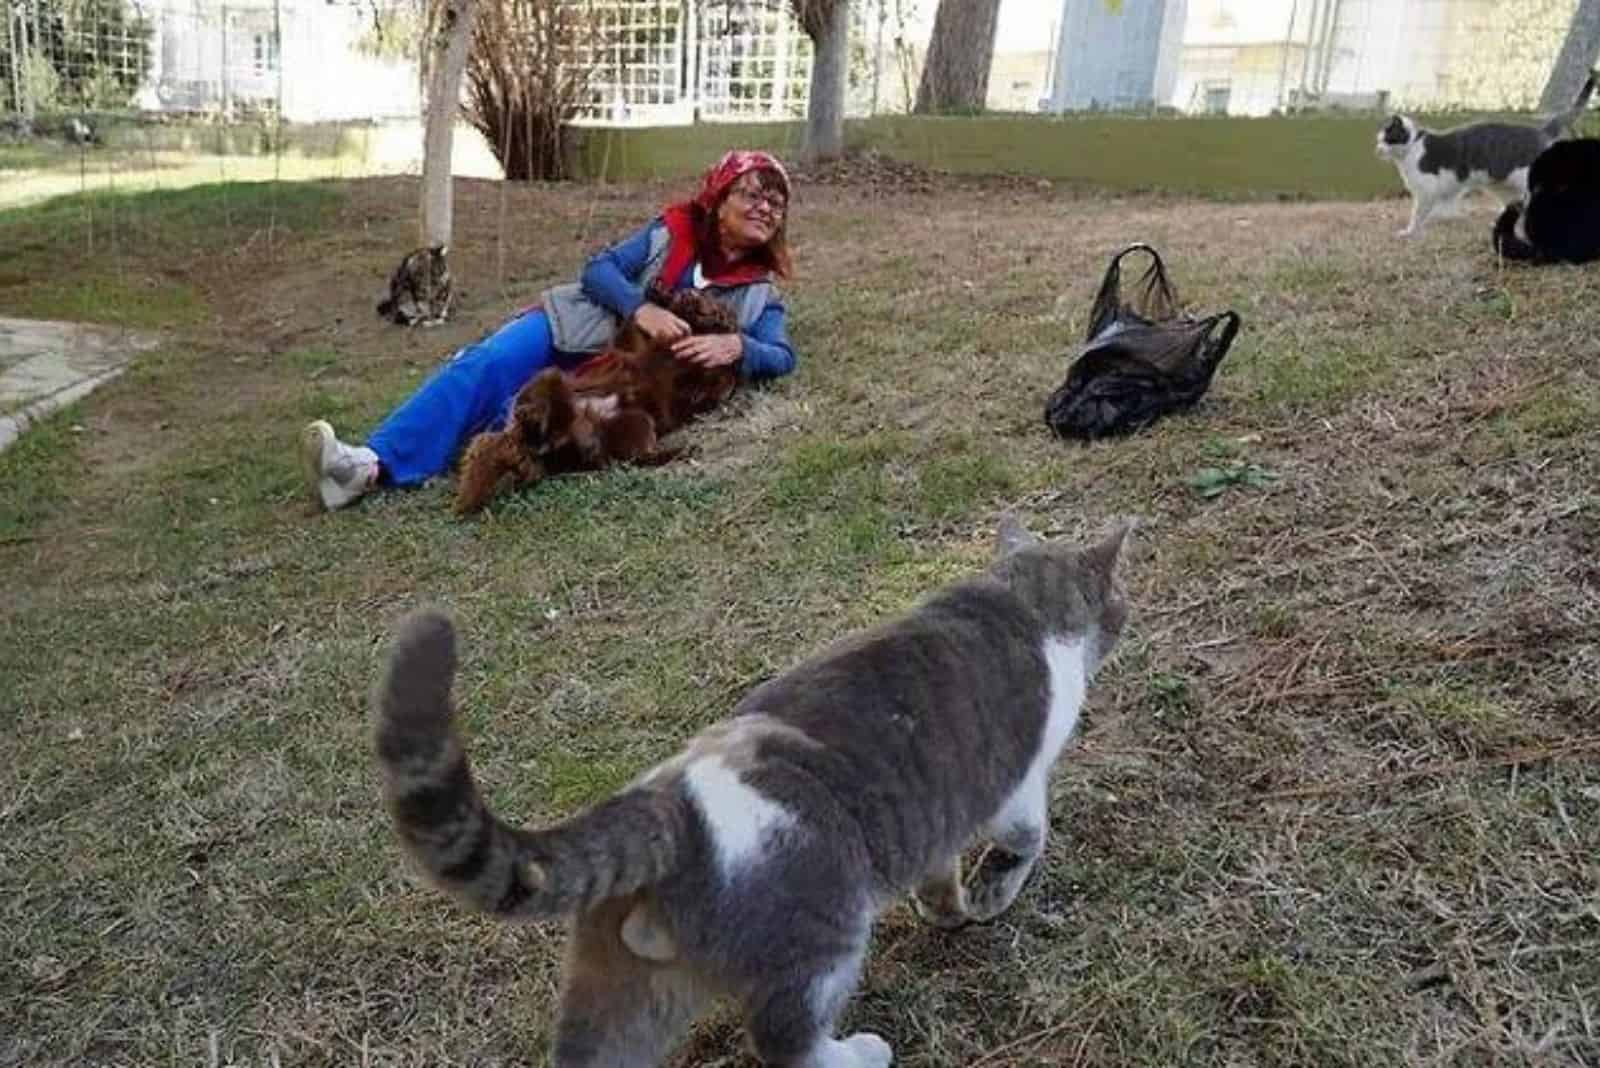 Ilhan and stray cats on the grass